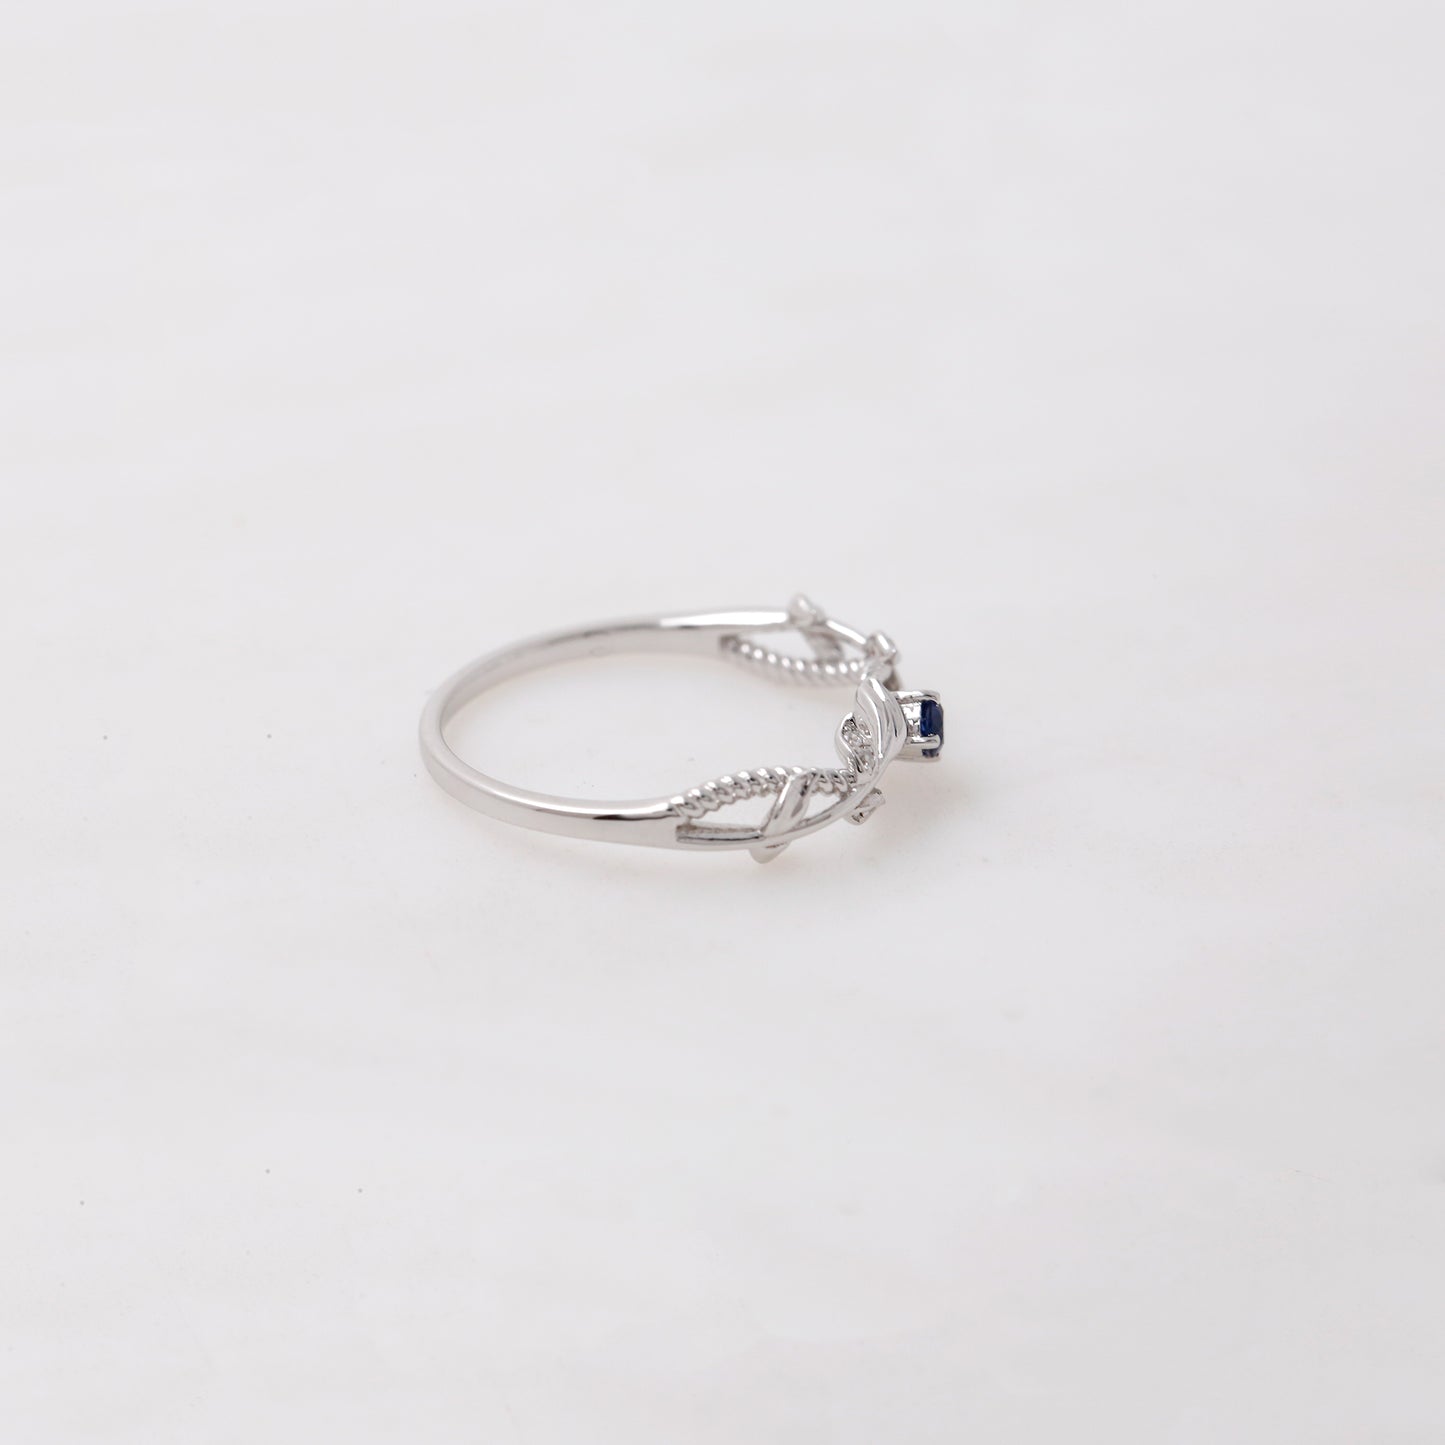 Silver Sapphire Leaf Ring